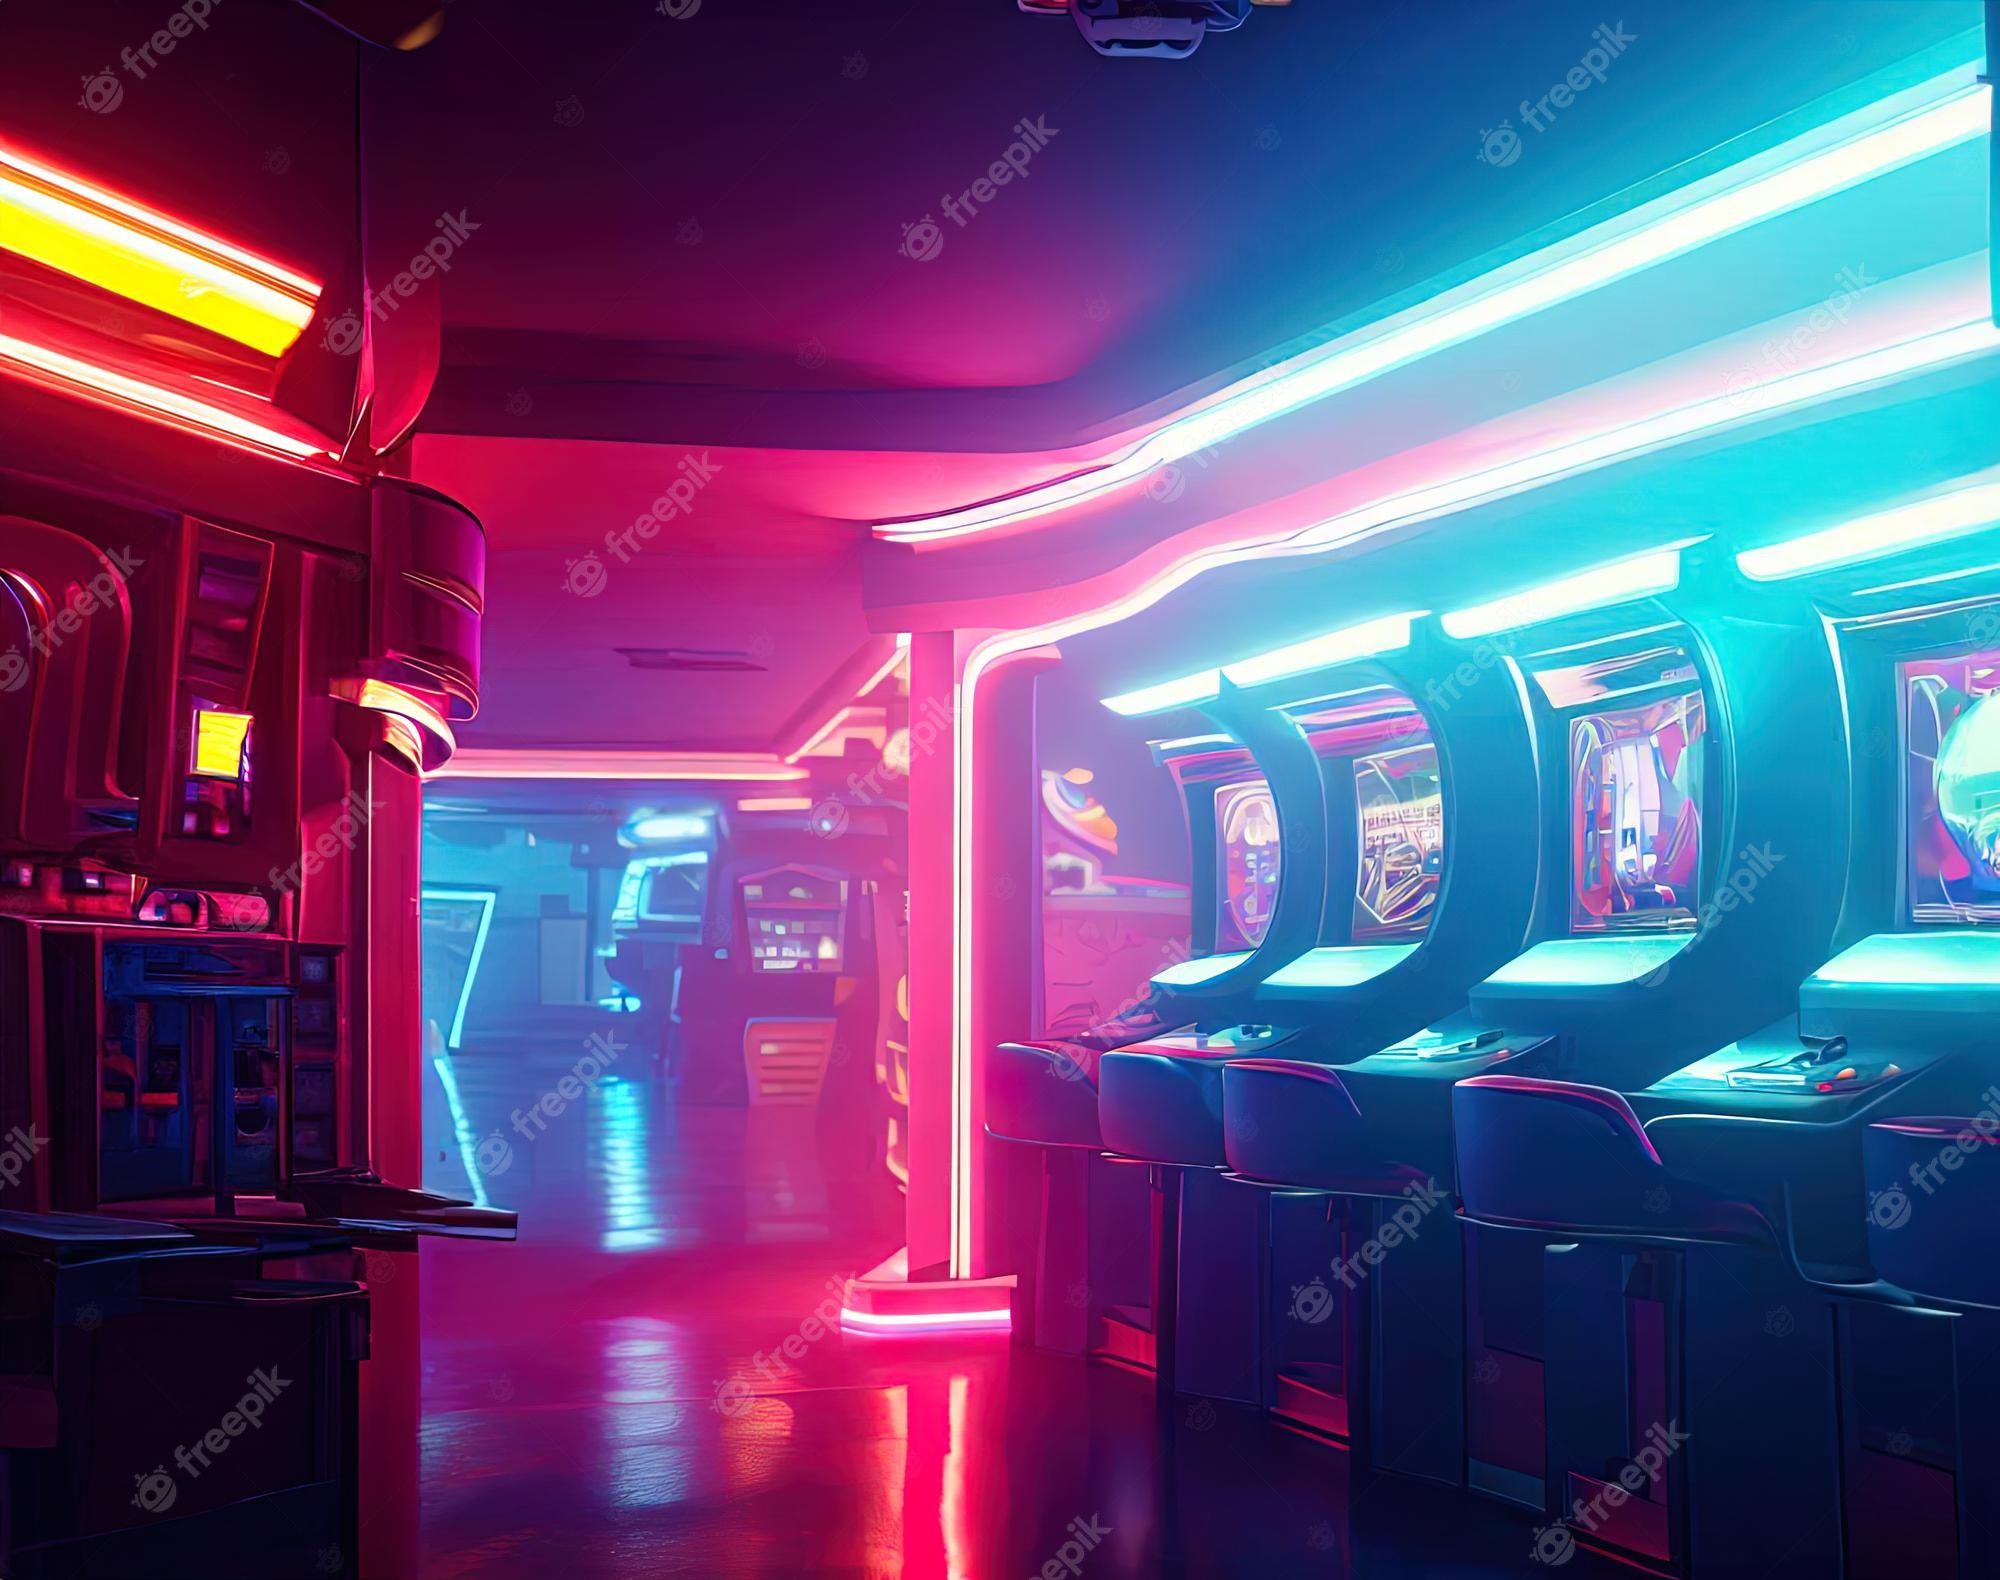 A room with old classic arcade slot machines with colorful neon lights - Arcade